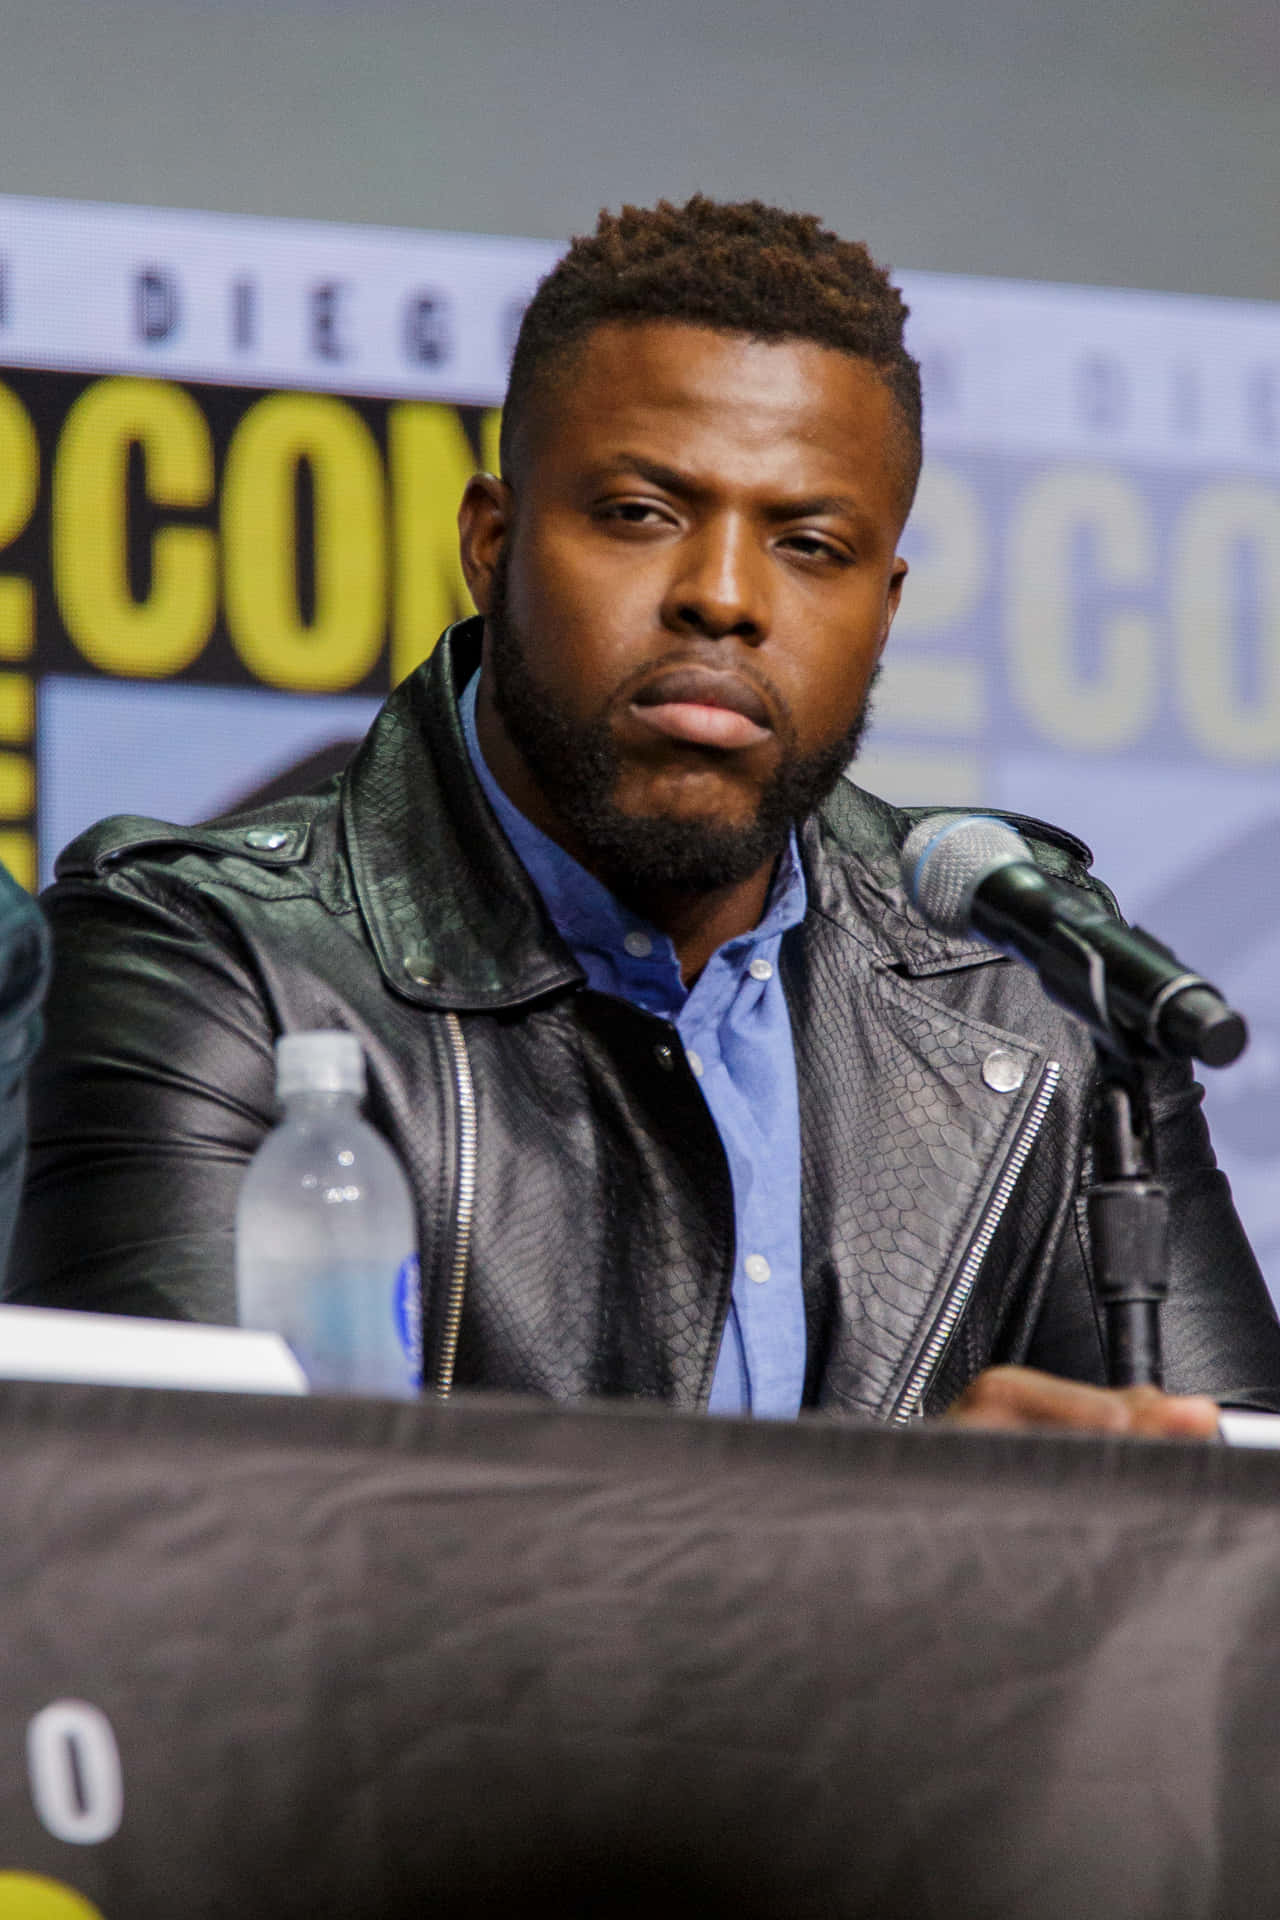 Winston Duke, an actor known for his roles in Black Panther and Us Wallpaper